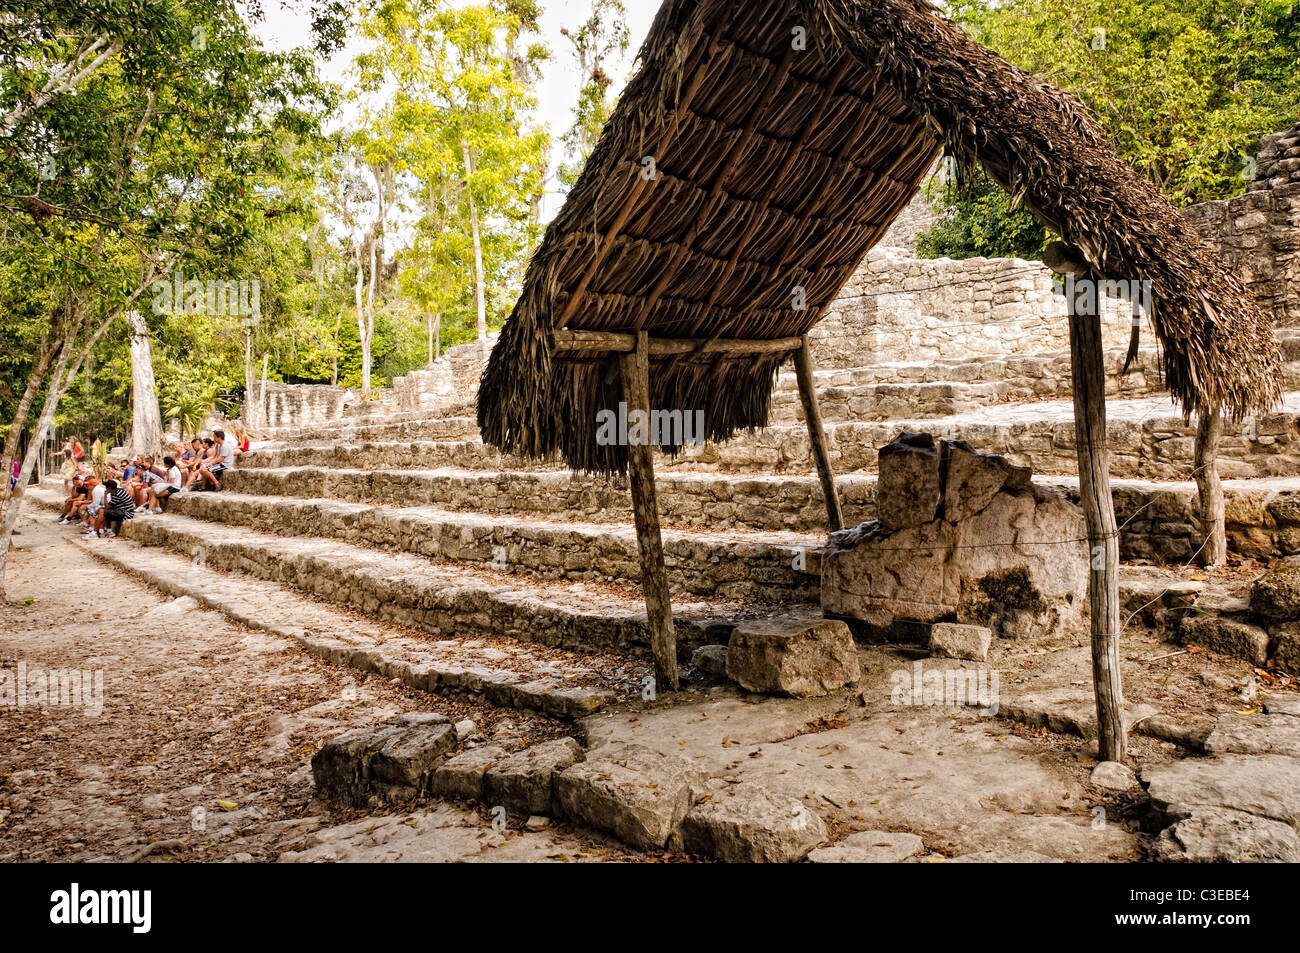 COBA MAYA RUINS, Mexico - In the foreground, a thatched roof protects a stone with inscriptions. In the background, a group of students sit on the lower steps of La Iglesia at Coba, an expansive Mayan site on Mexico's Yucatan Peninsula not far from the more famous Tulum ruins. Nestled between two lakes, Coba is estimated to have been home to at least 50,000 residents at its pre-Colombian peak. Stock Photo